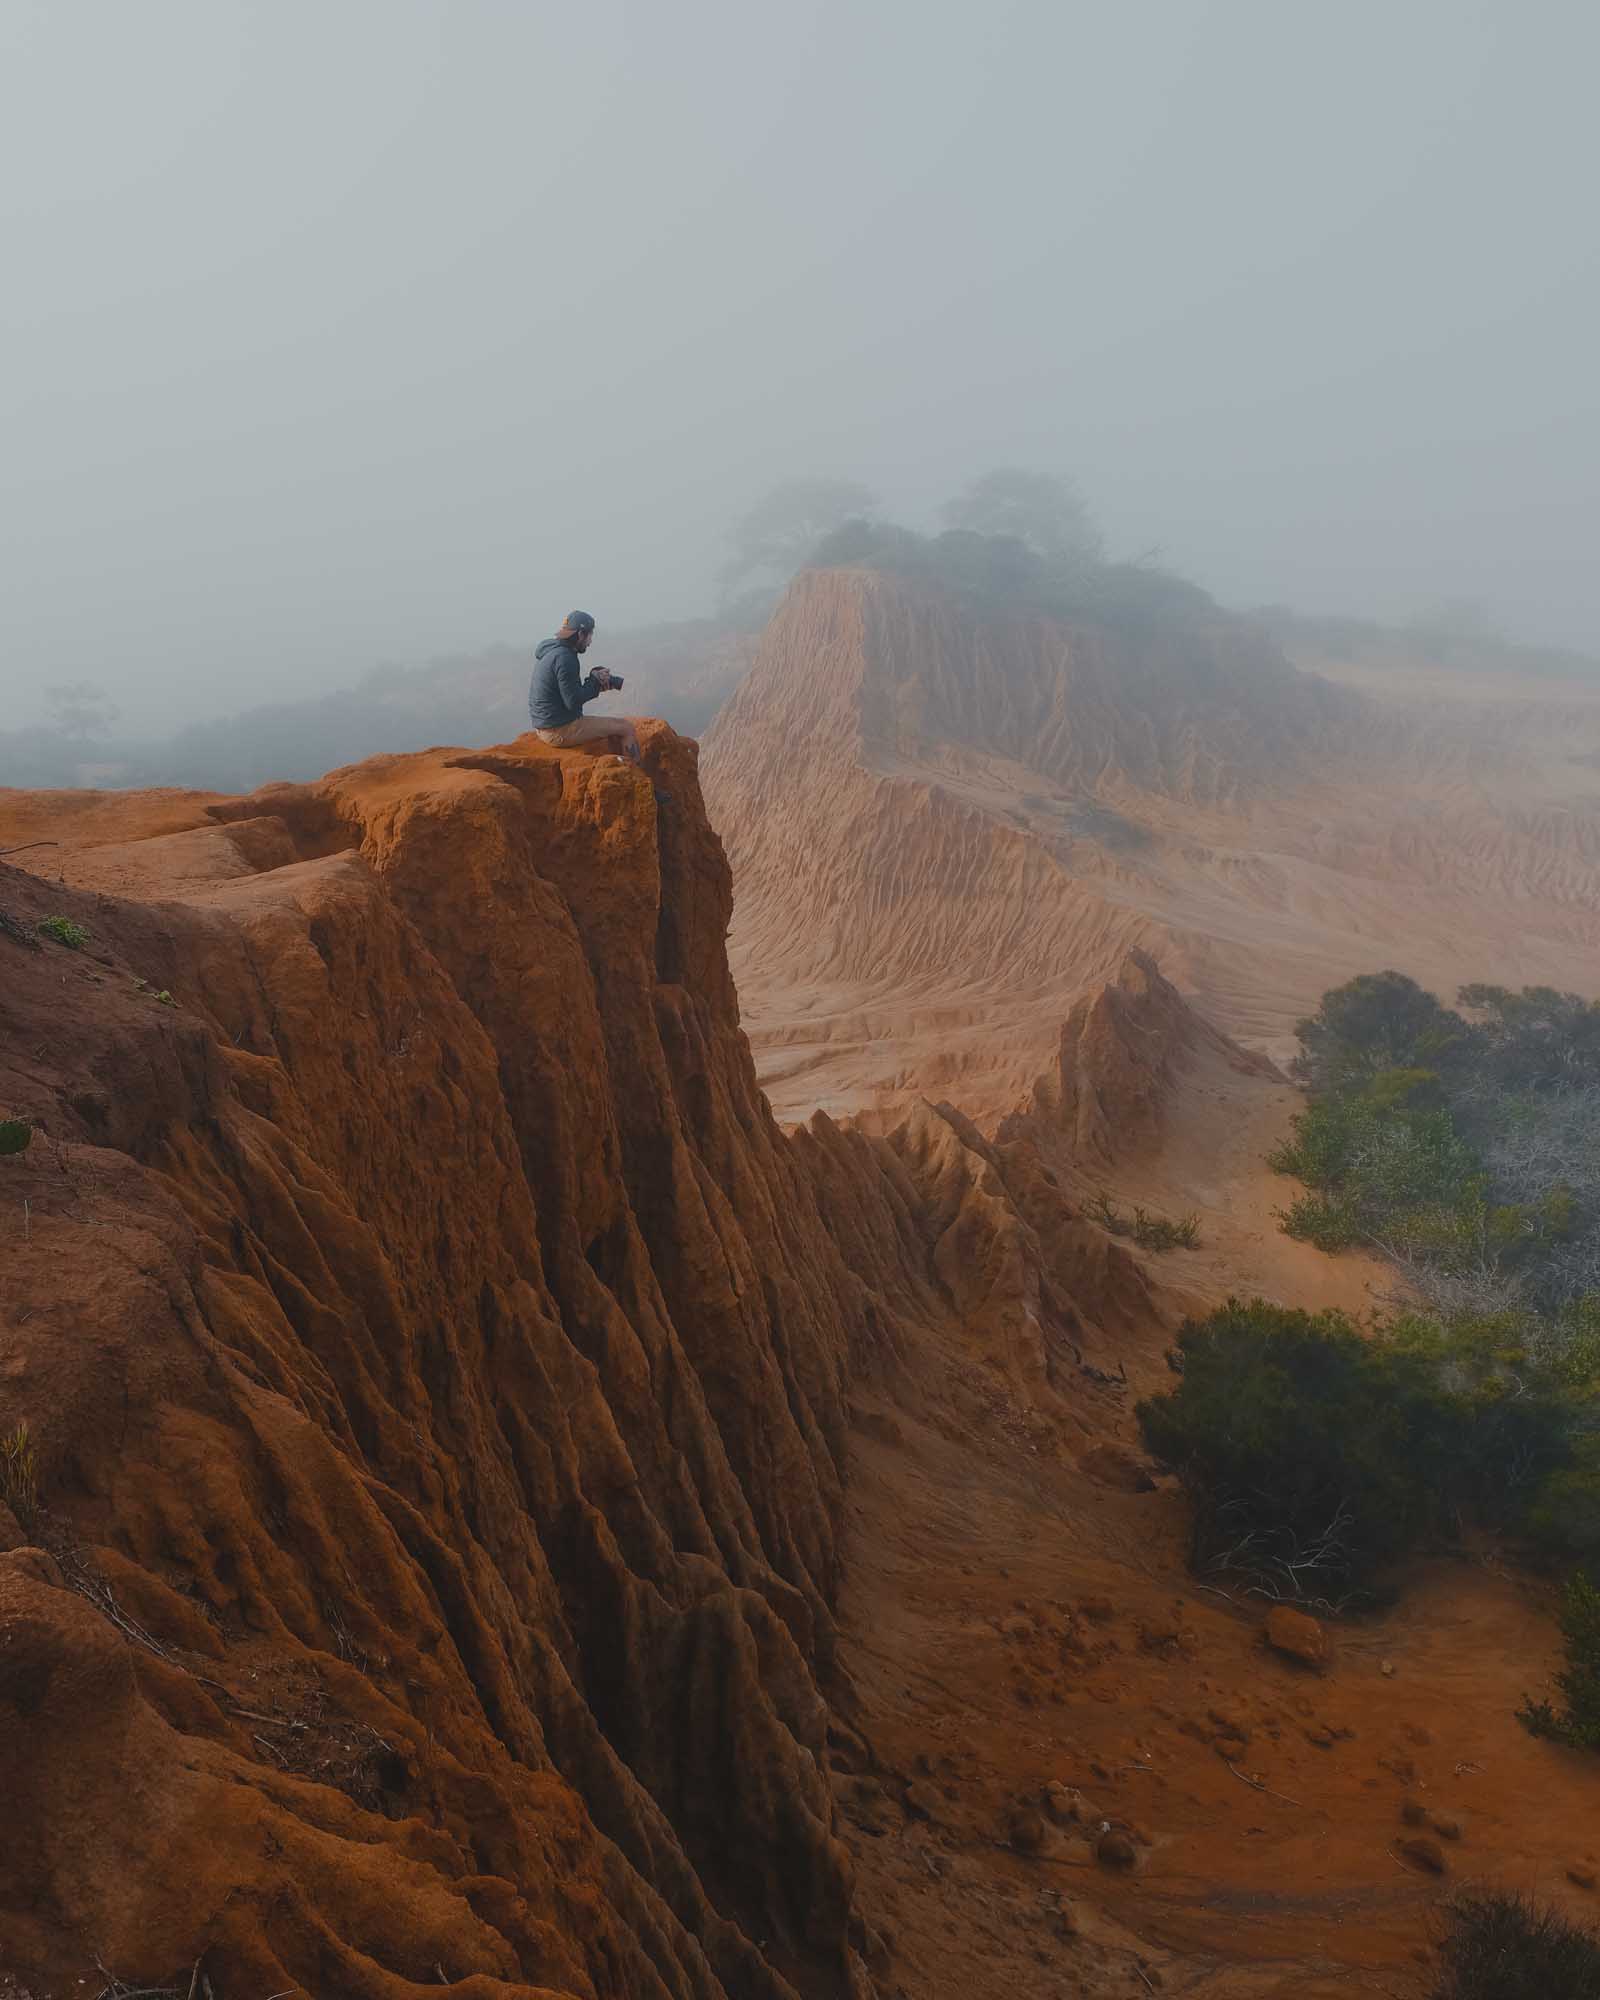 A man sits on the edge of a sandy cliffside